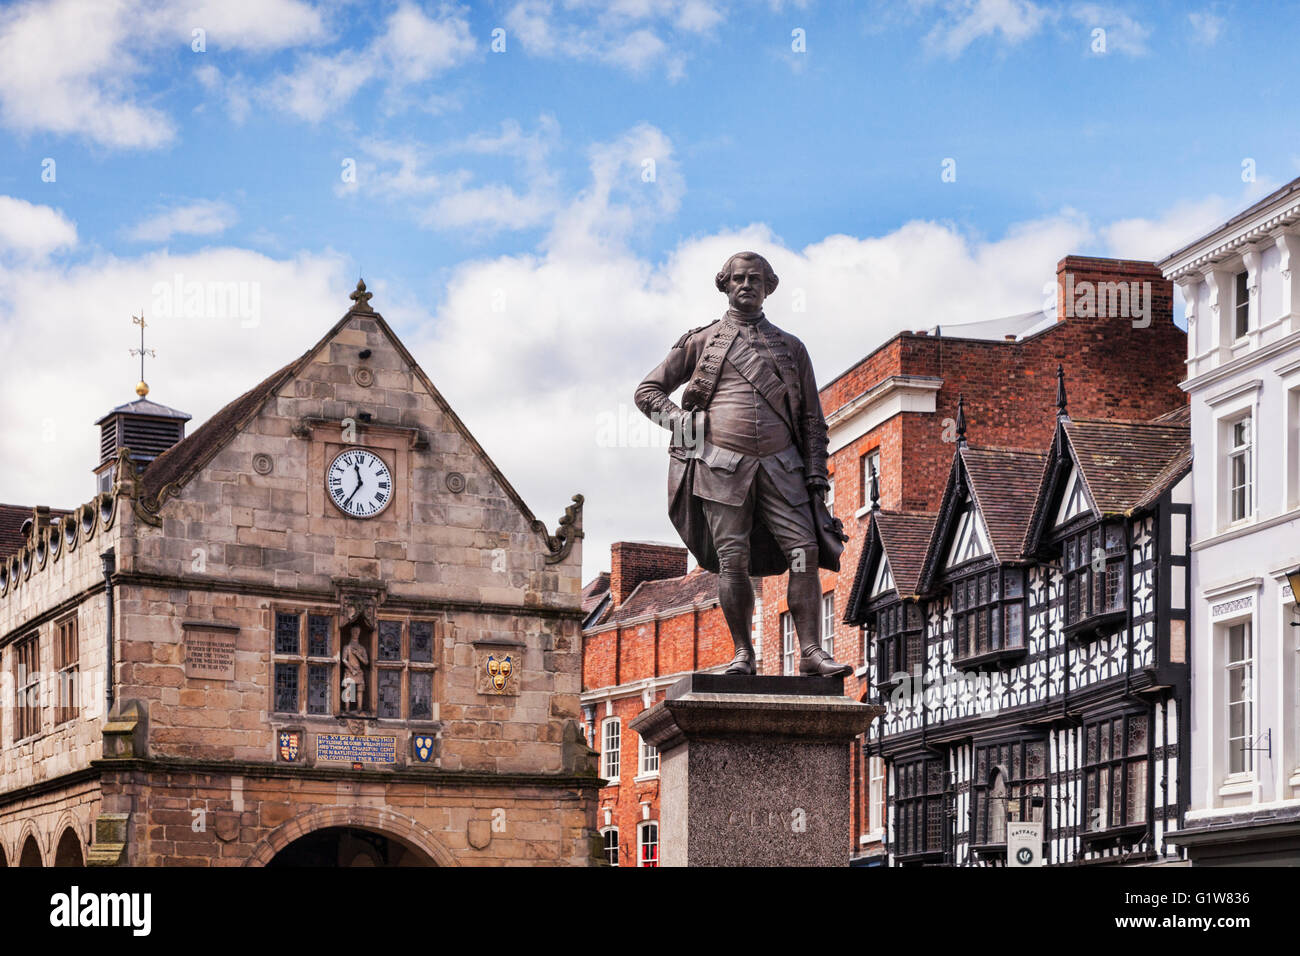 Statue of Major General Sir Robert Clive, known as Clive of India, in the market square at Shrewsbury, Shropshire, England, UK Stock Photo